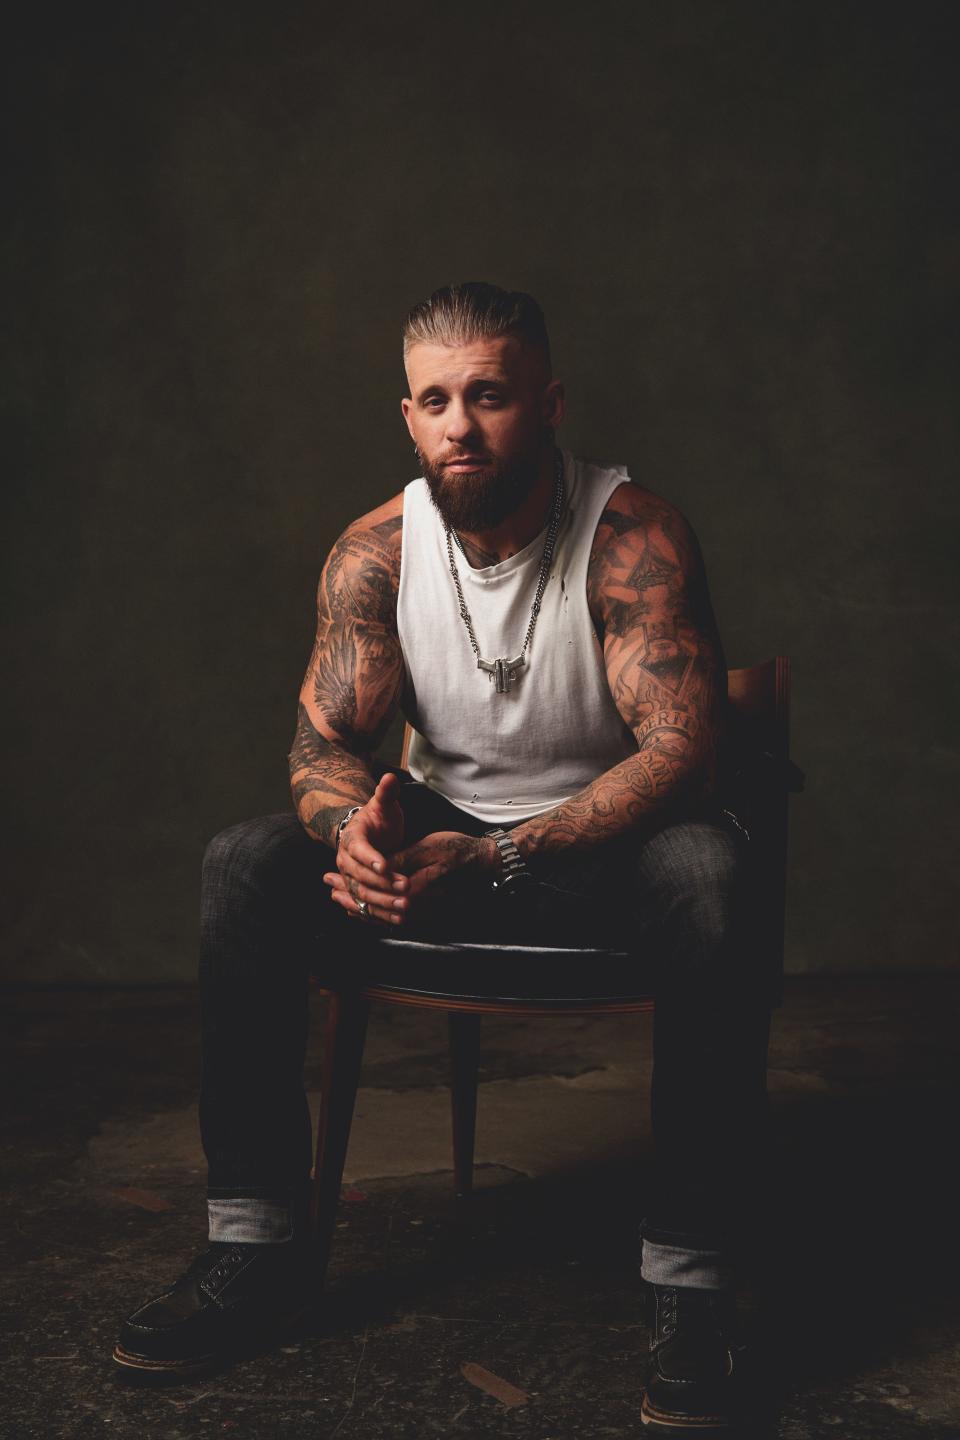 Country music artist Brantley Gilbert will be performing on March 21 at the Canton Memorial Civic Center. Opening acts are Dylan Marlowe, Demun Jones and Struggle Jennings.